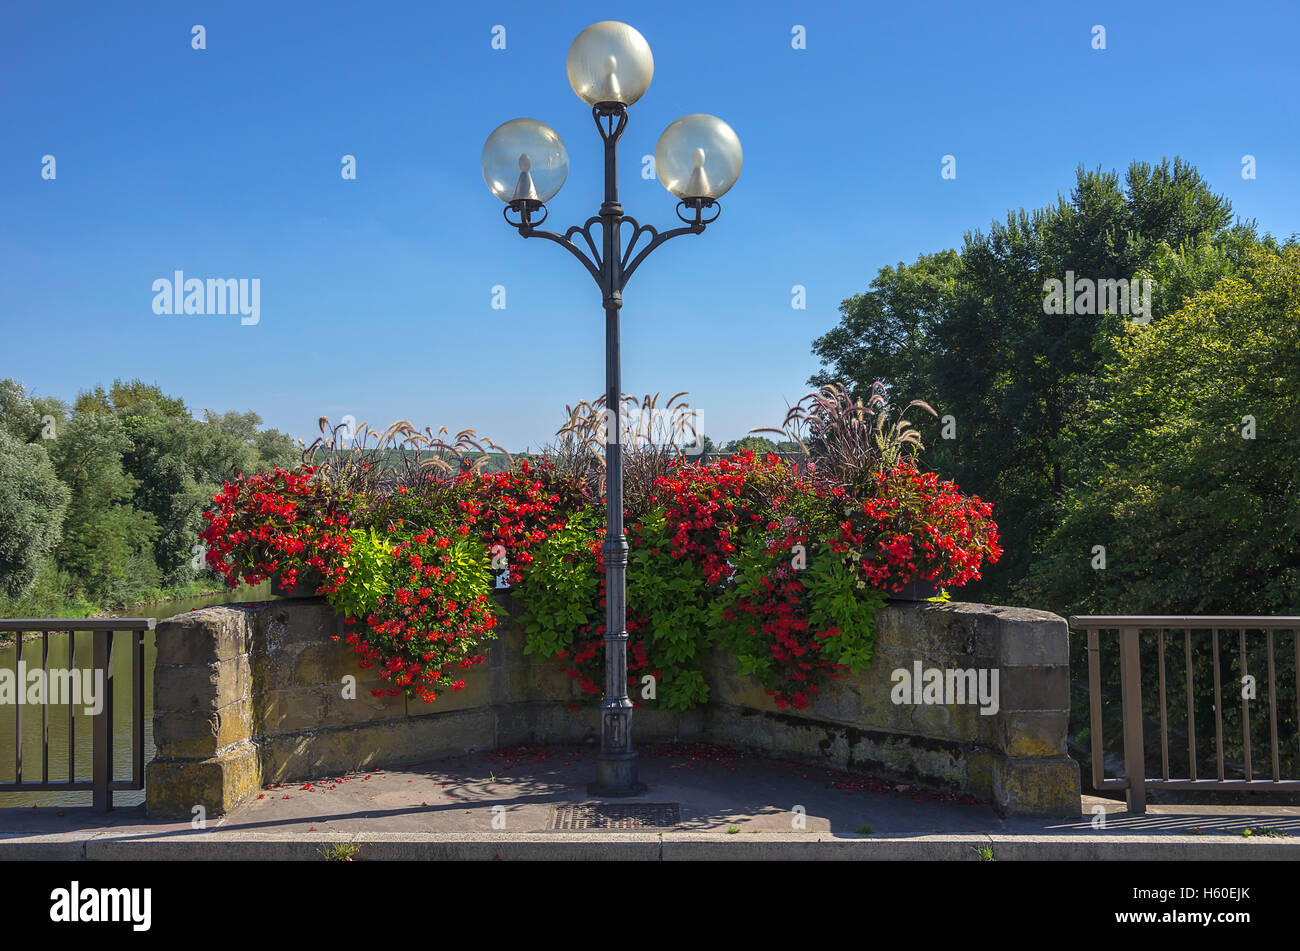 City lights and flower boxes, Lauffen am Neckar, Baden-Wurttemberg, Germany. Stock Photo